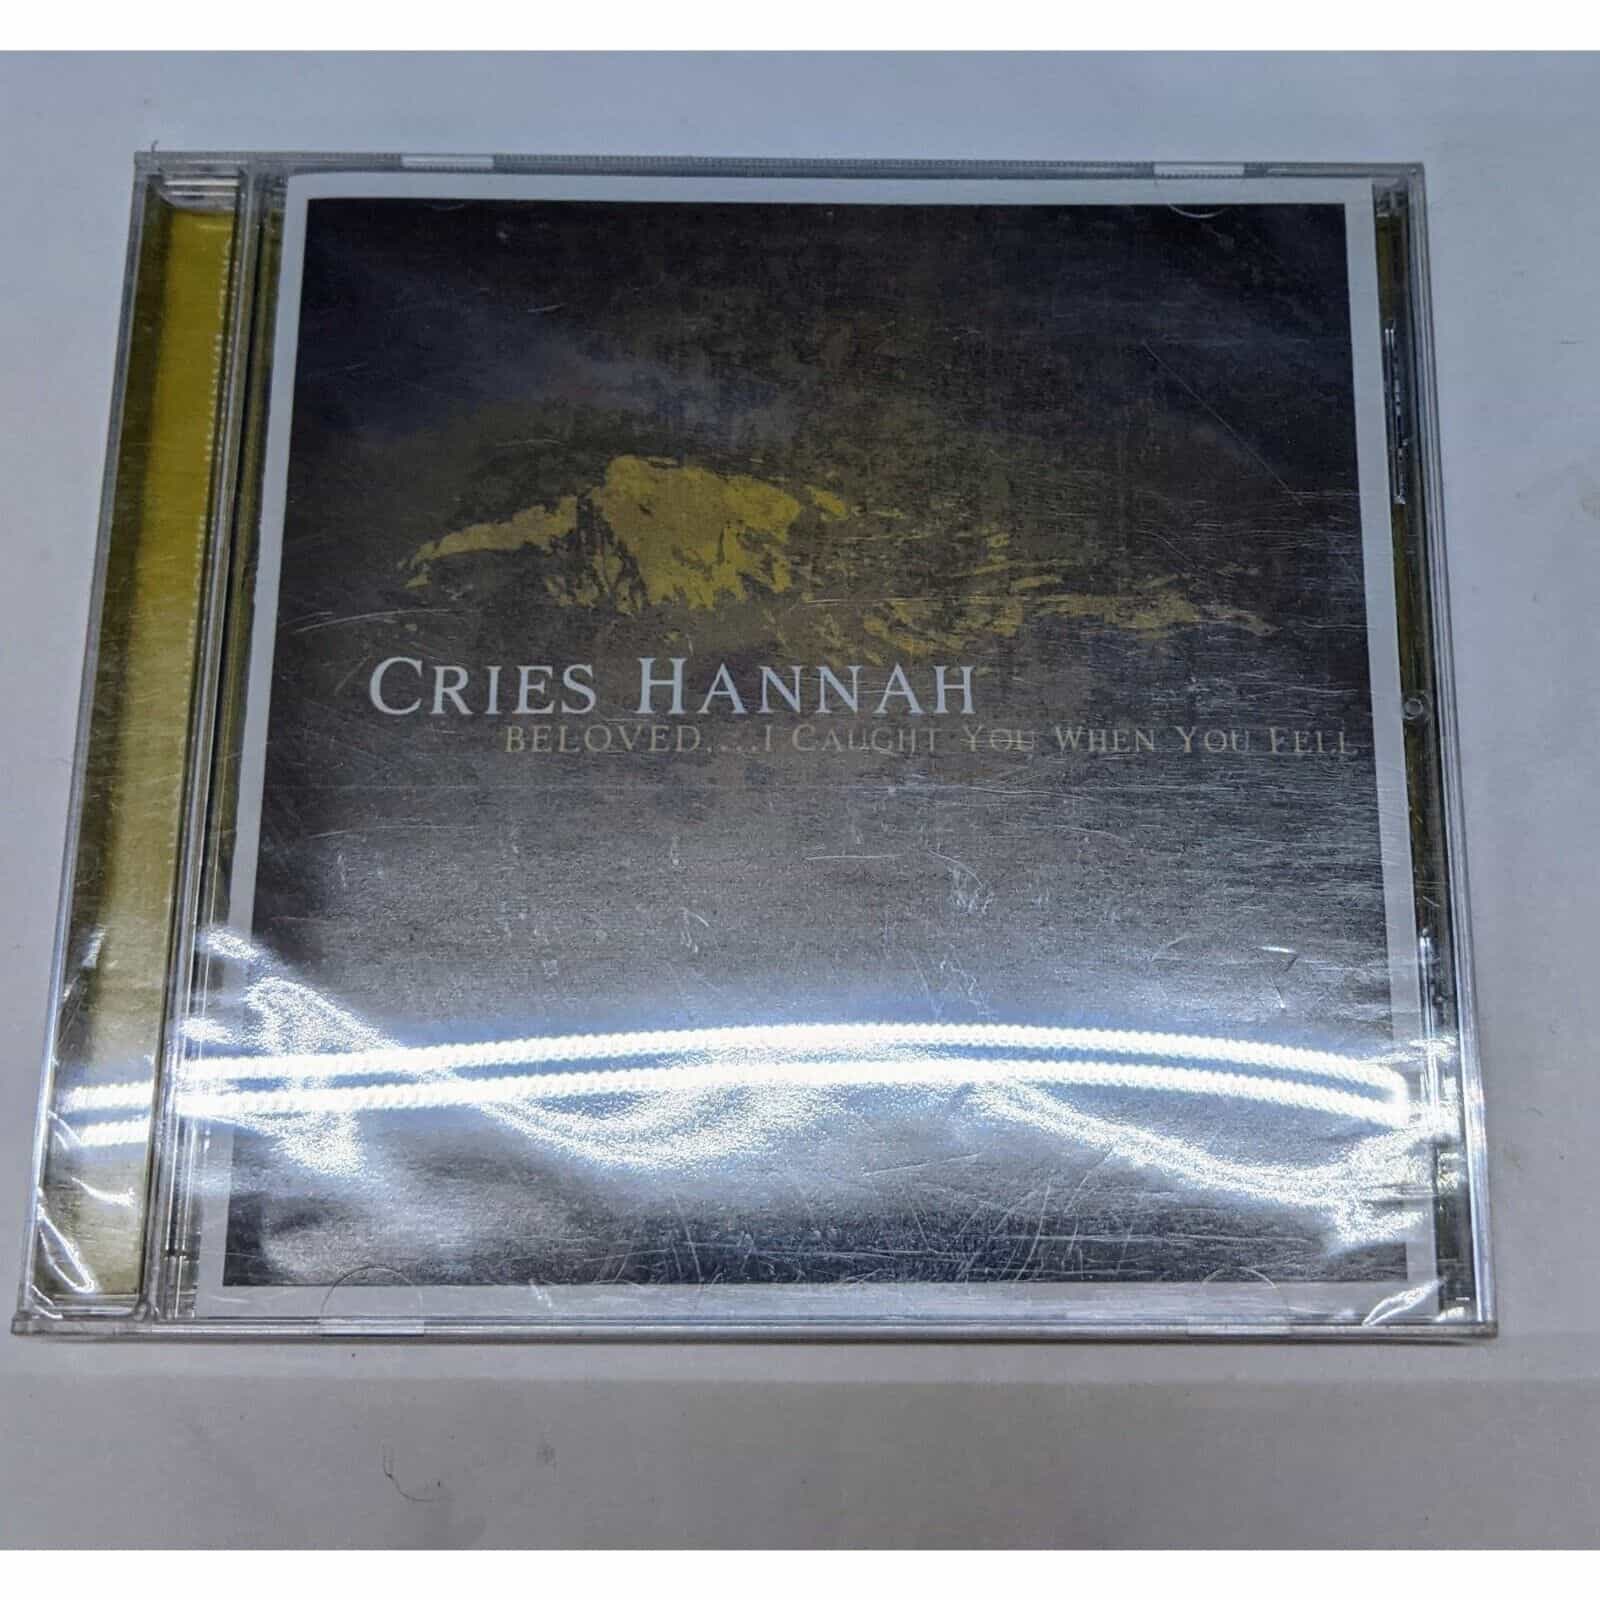 Beloved…I Caught You When You Fell by Cries Hannah Music Album